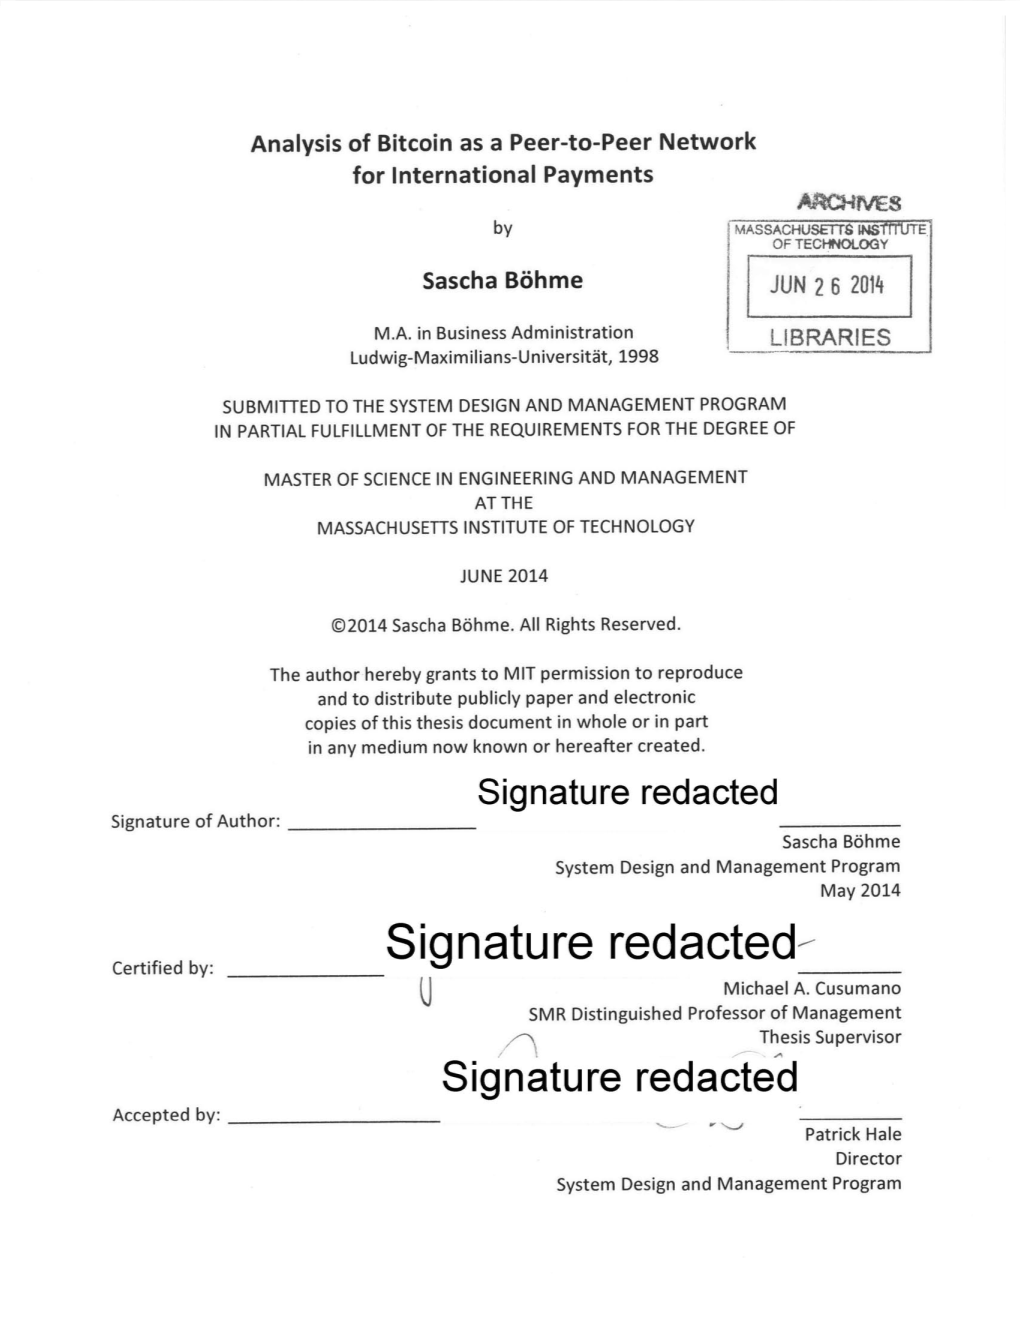 Signature Redacted- Certified By: Michael A